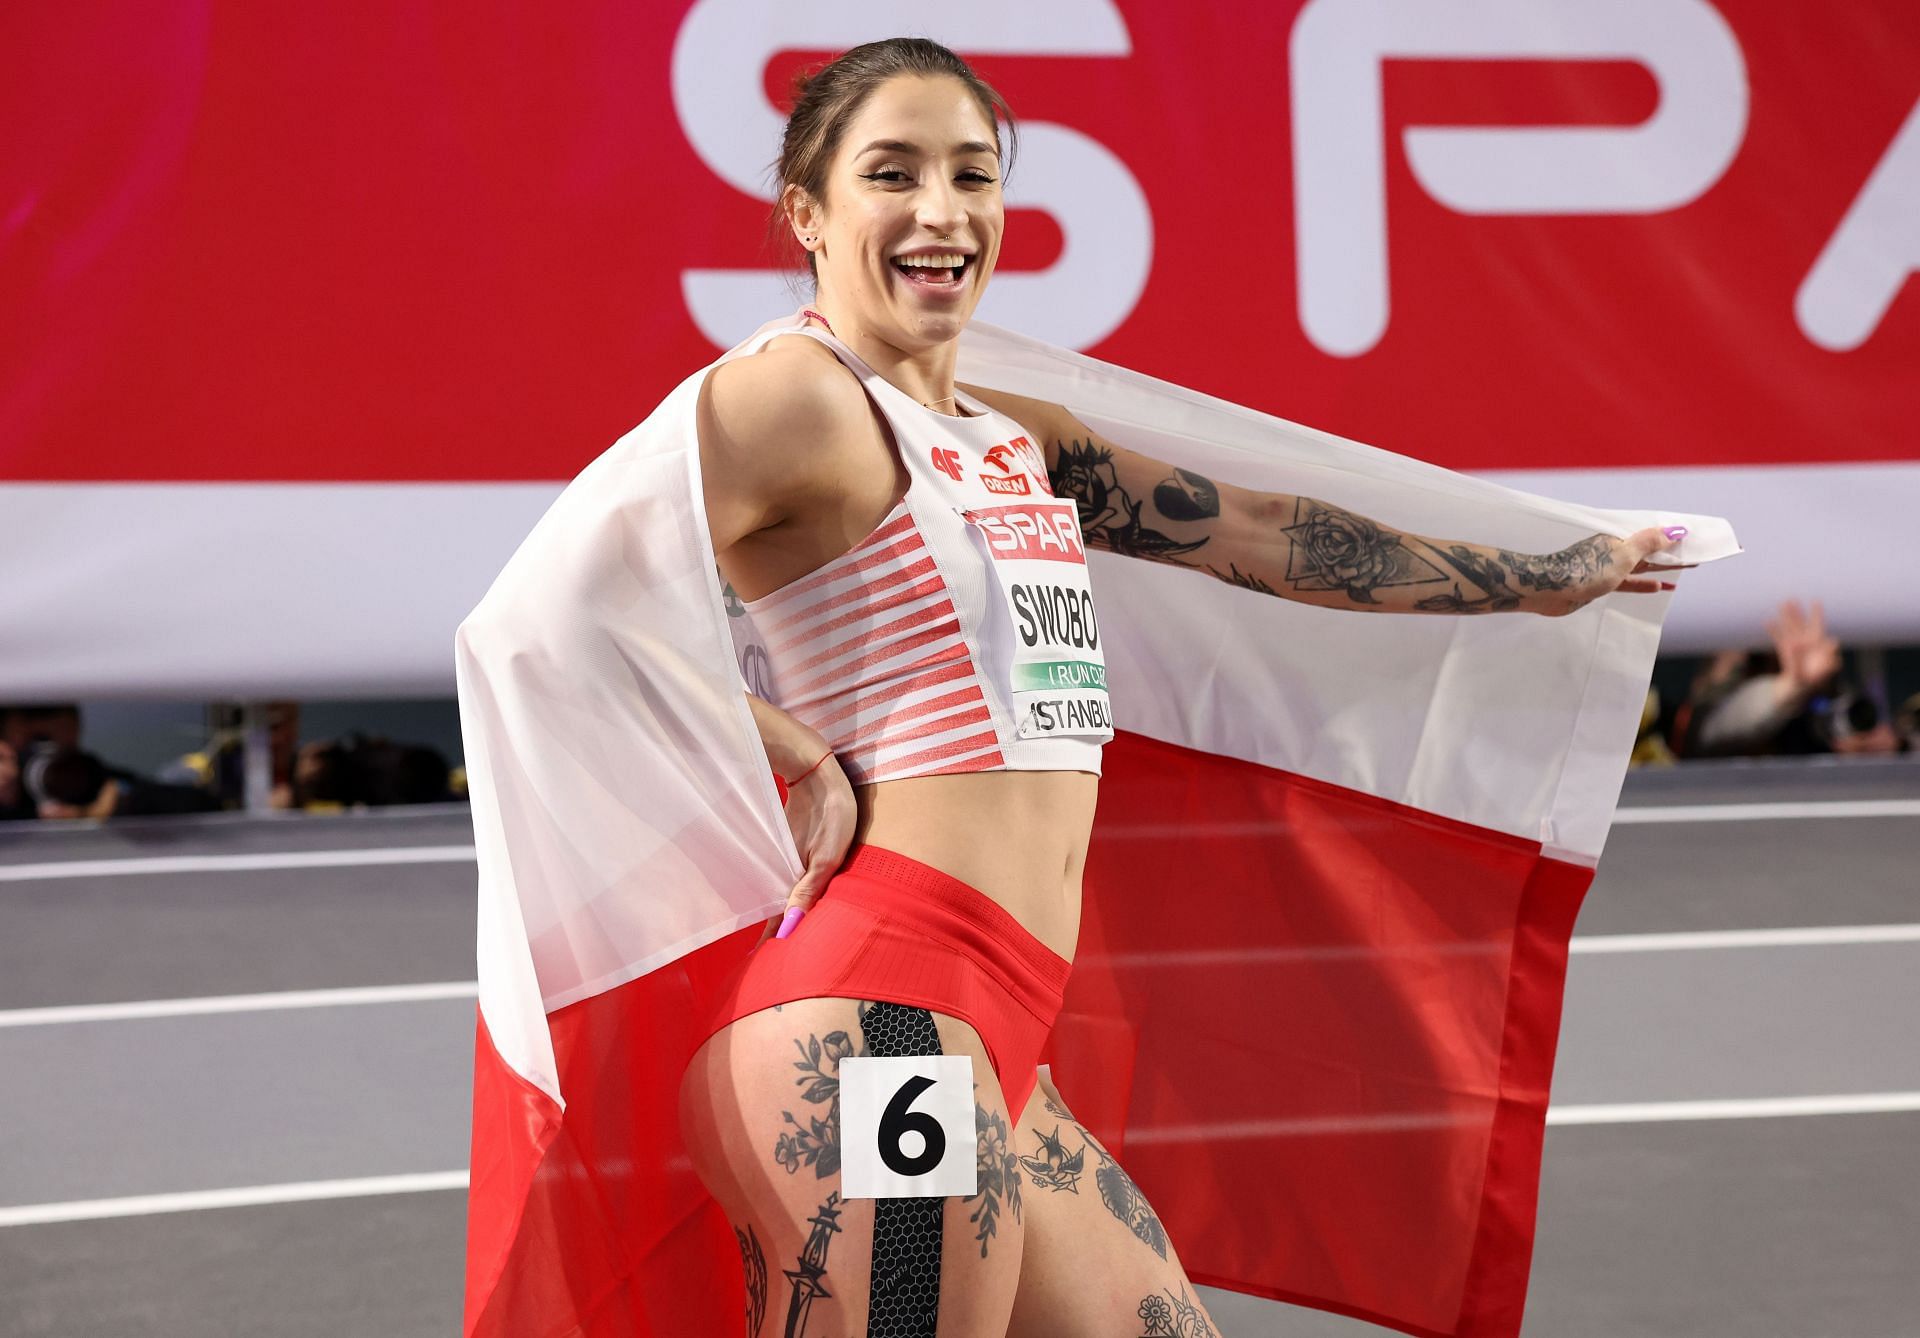 Three-time European Indoor Championships medalist Ewa Swoboda will also be in action at the Czech Indoor Gala 2024. (Photo by Alex Livesey/Getty Images for European Athletics)